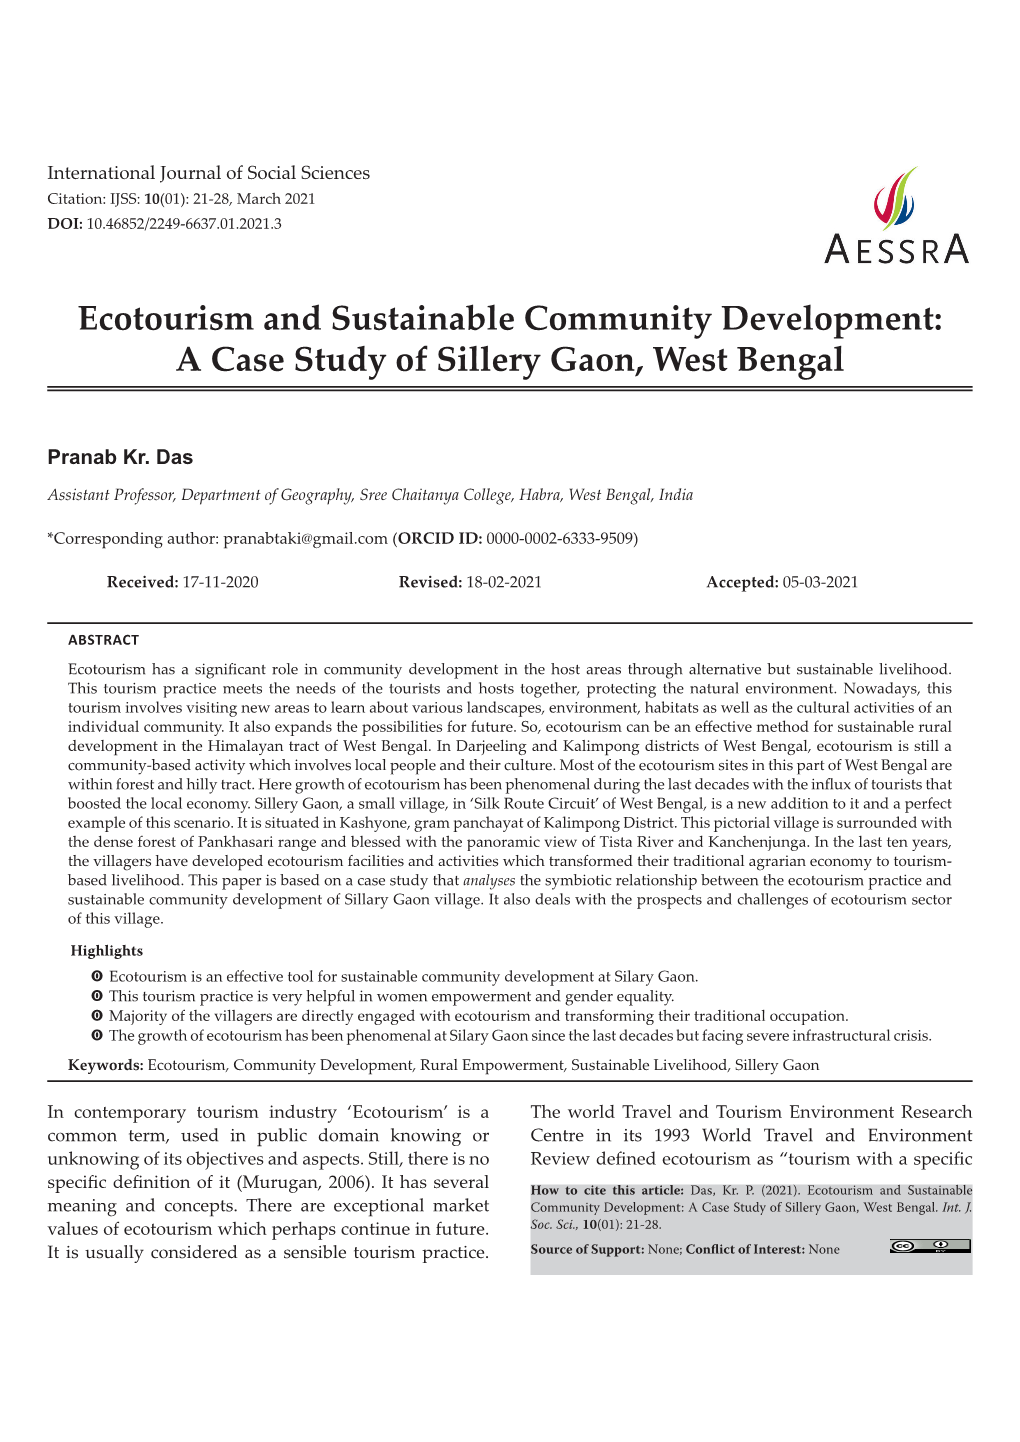 Ecotourism and Sustainable Community Development: a Case Study of Sillery Gaon, West Bengal